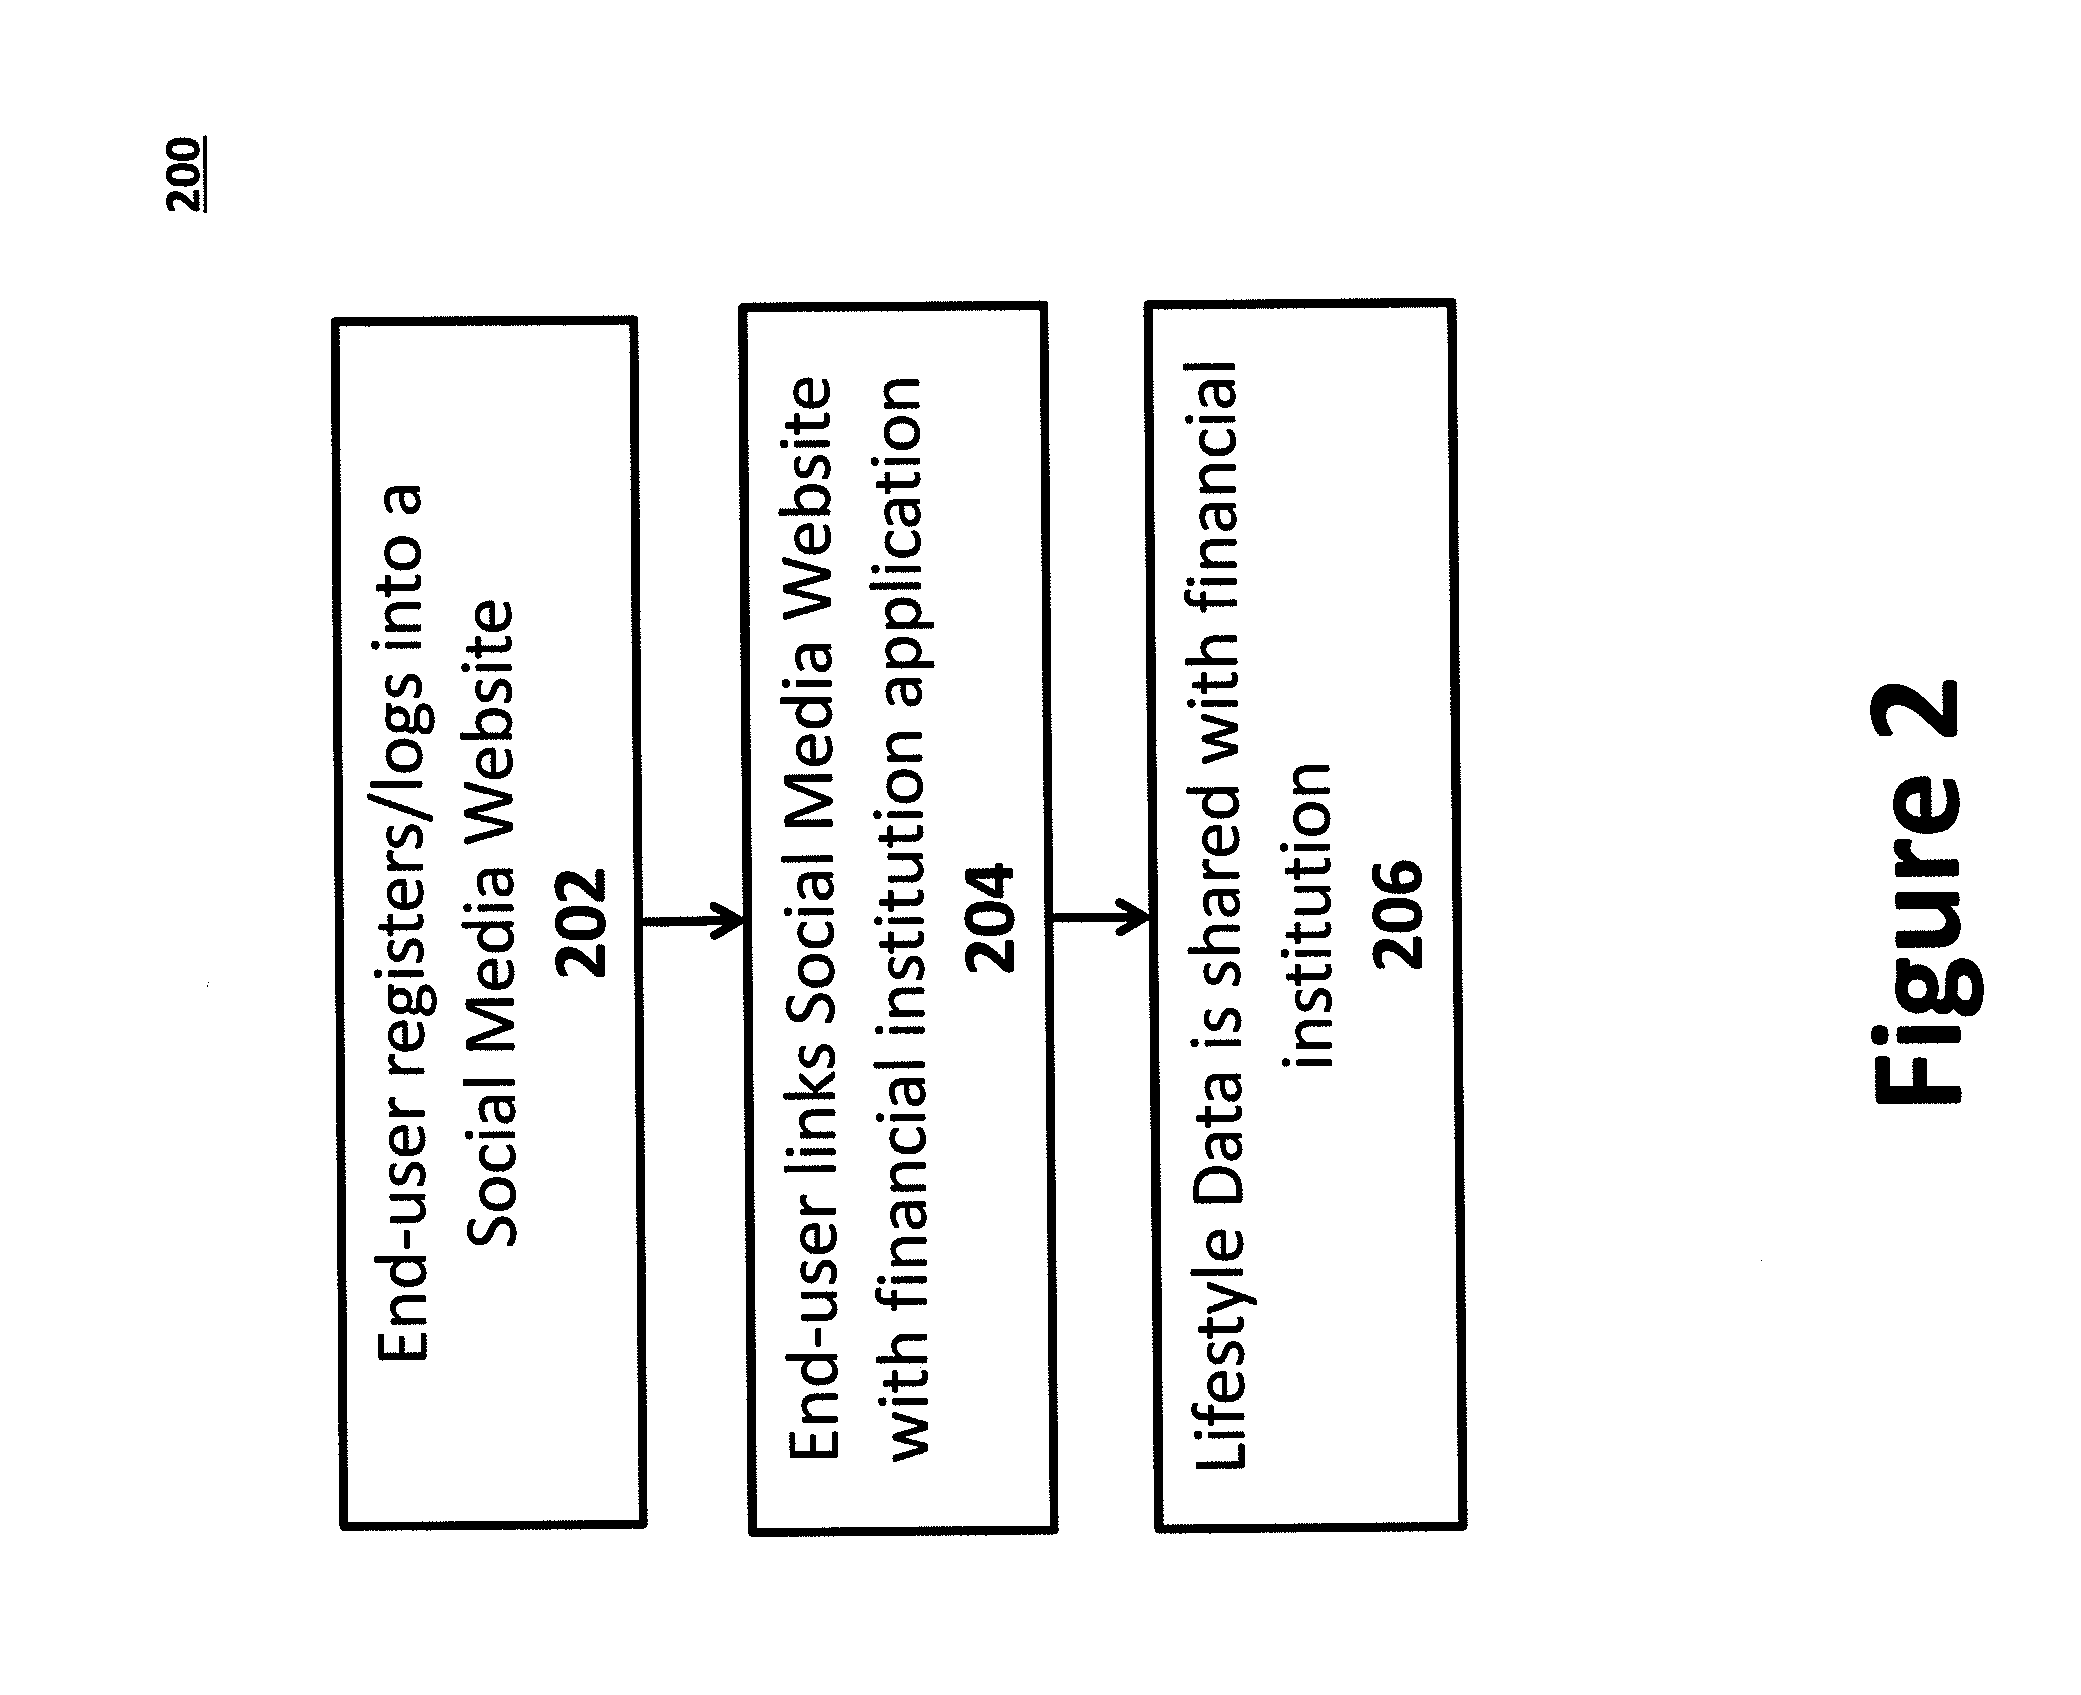 System and method for consumer fraud protection